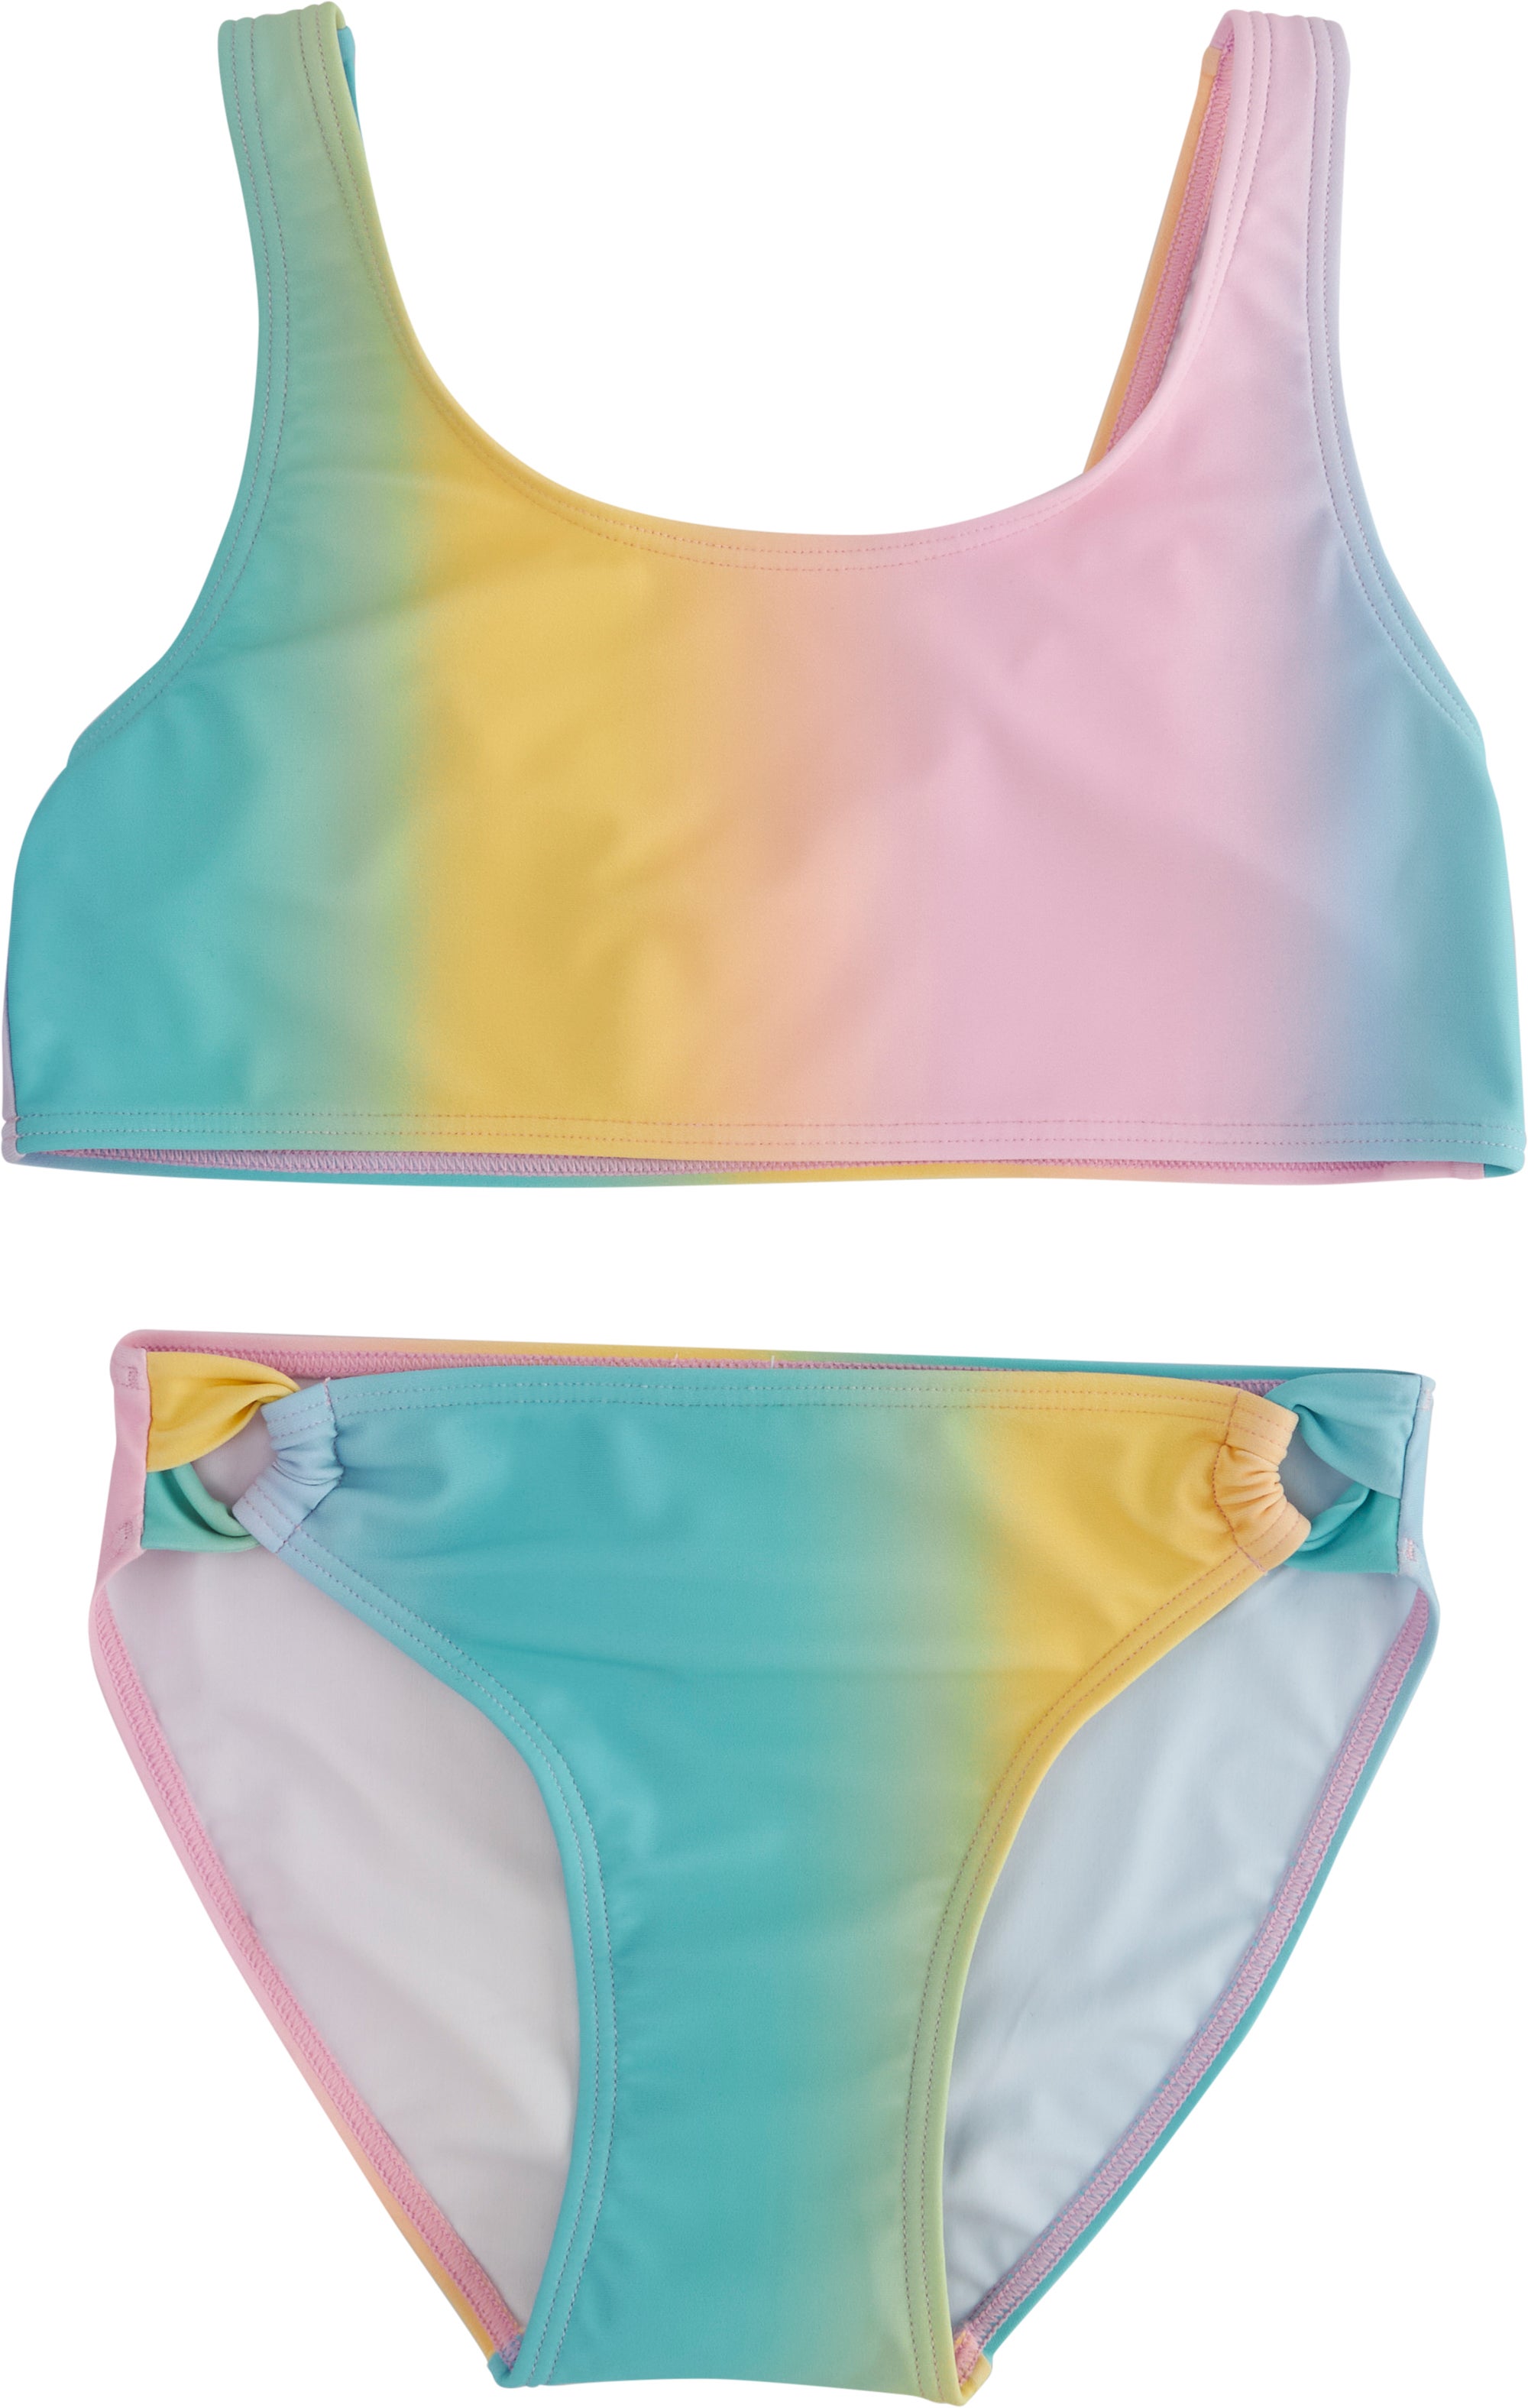 https://www.postie.co.nz/content/products/kids-scoop-neck-bikini-ombre-a-outfit-819258.jpg